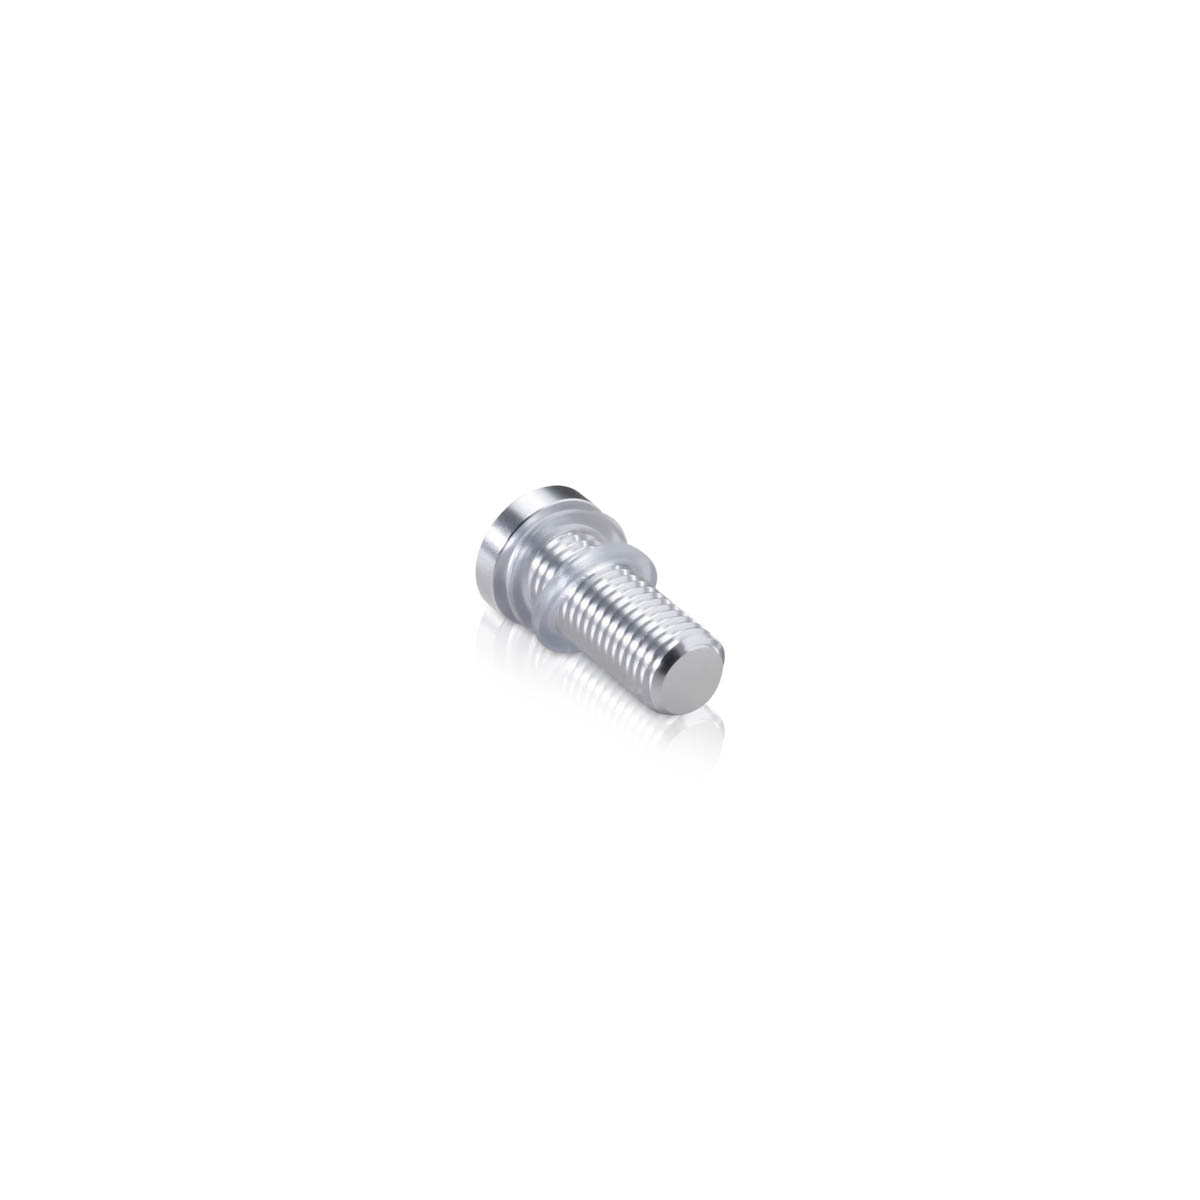 AL12-25AS, AL12-30AS, AL12-50AS, AL12-70AS Head replacement for Mbs-Standoffs 1/2'' Diameter, Aluminum Clear Shiny Finish Standoffs (Includes 2 Silicone Washers).